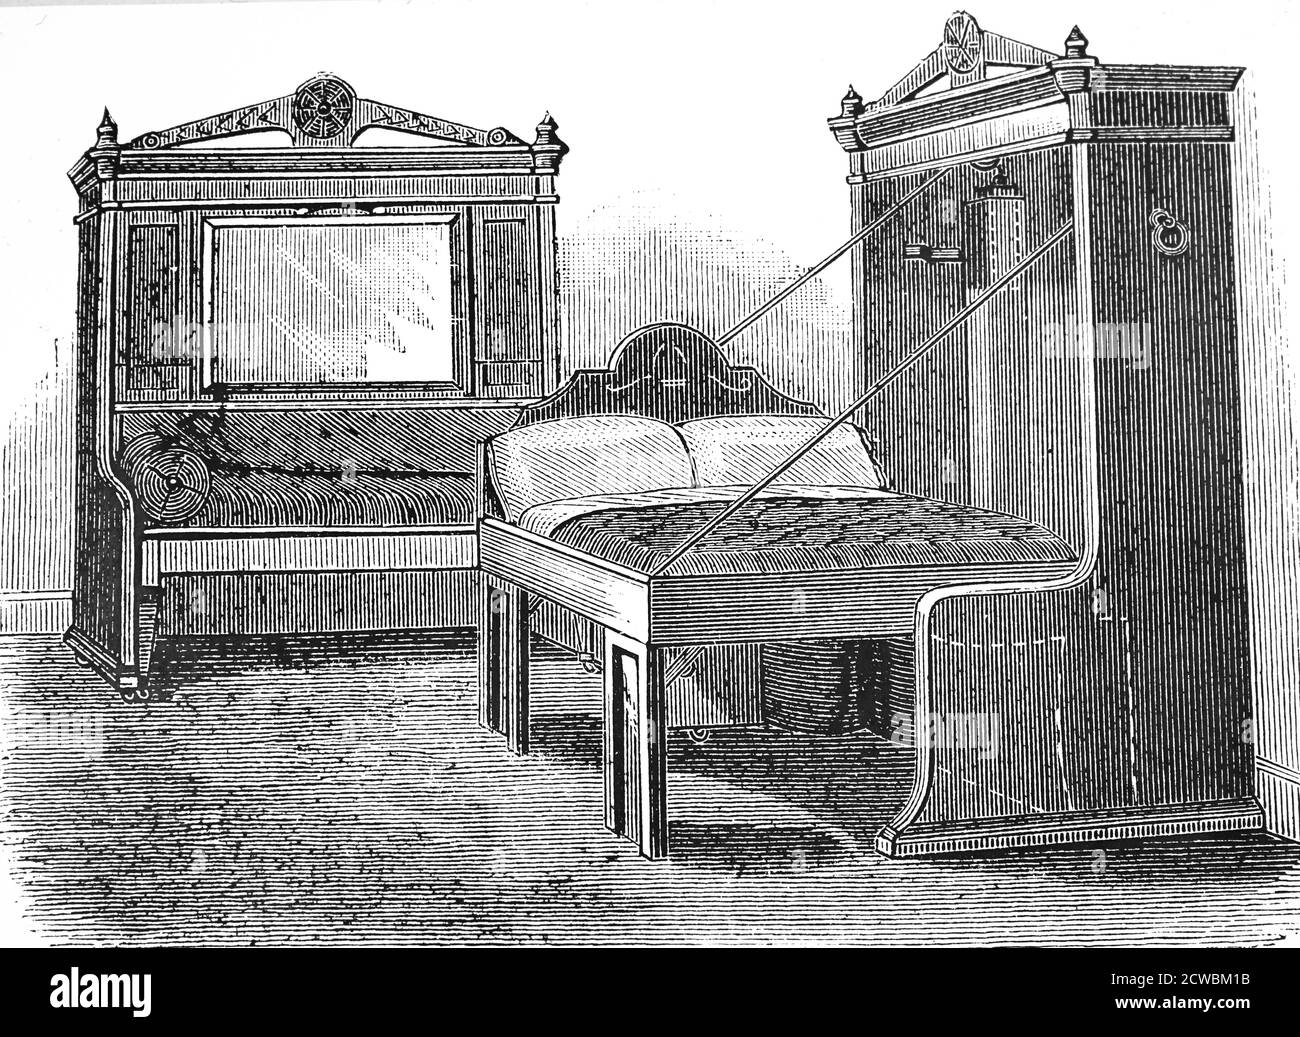 Engraving depicting a folding bed which could be transformed into a sofa for daytime use. Stock Photo